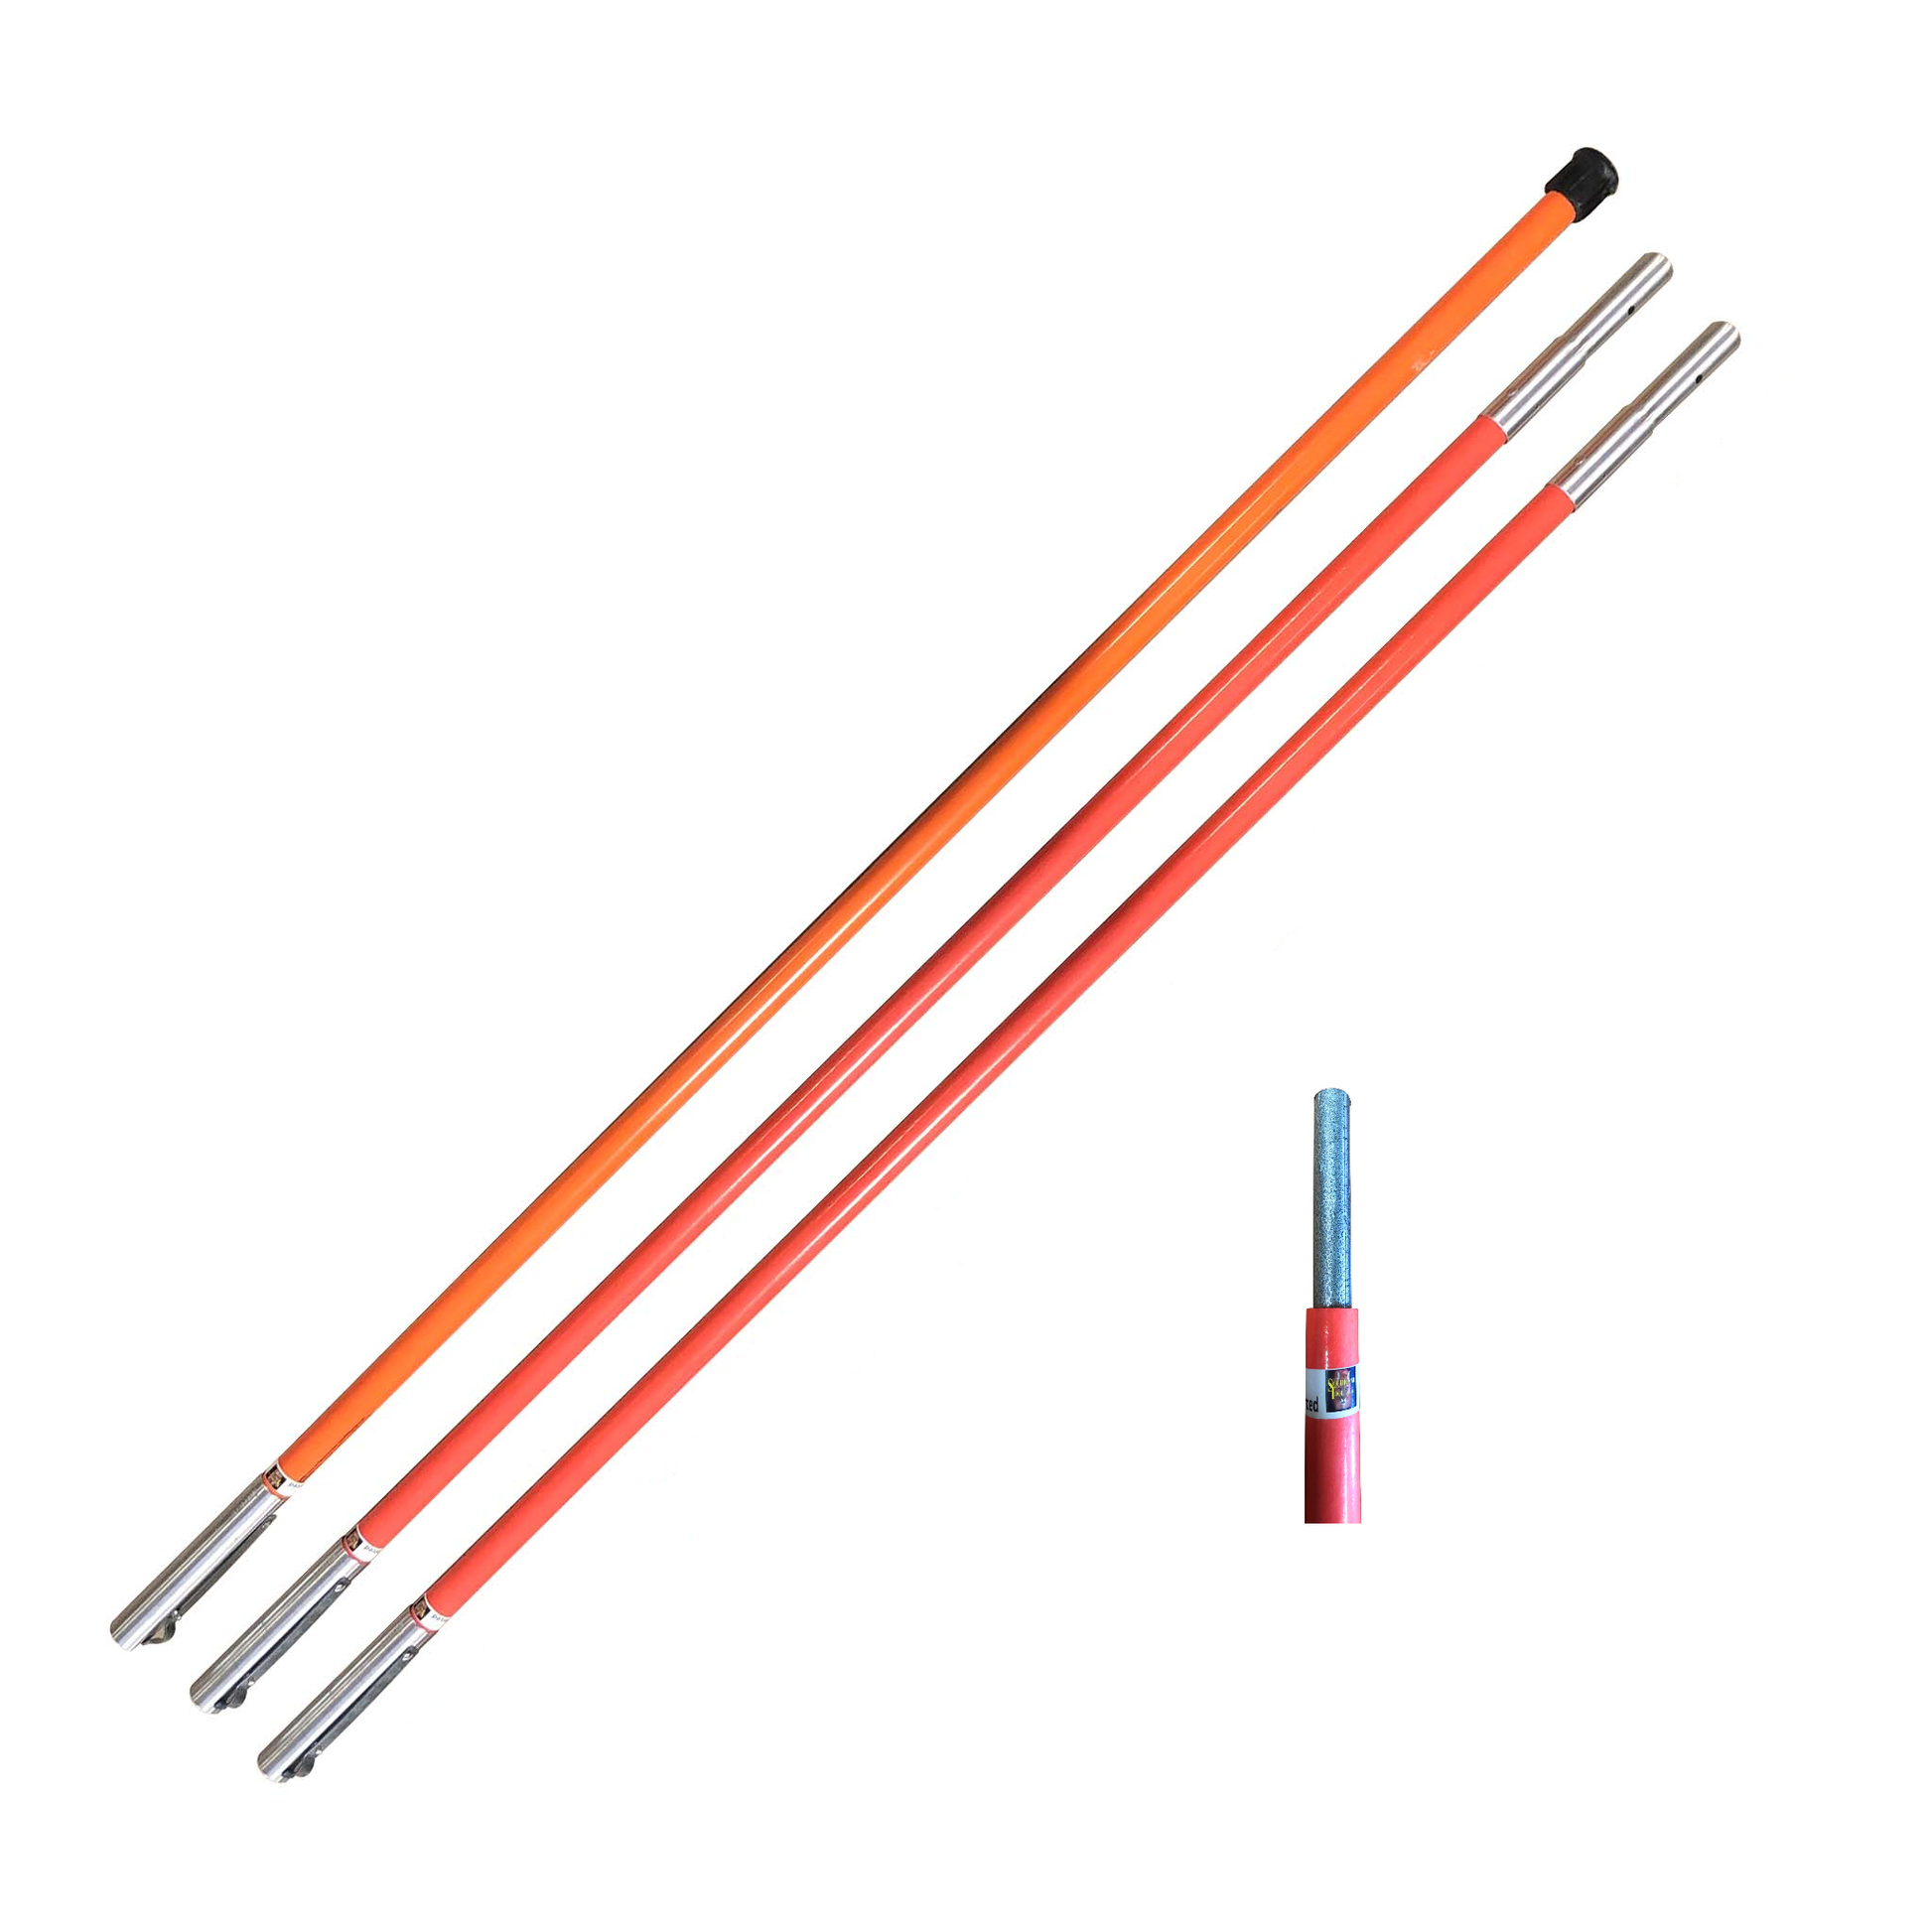 Steel Reinforced Fiberglass Poles for All Sewer Tools